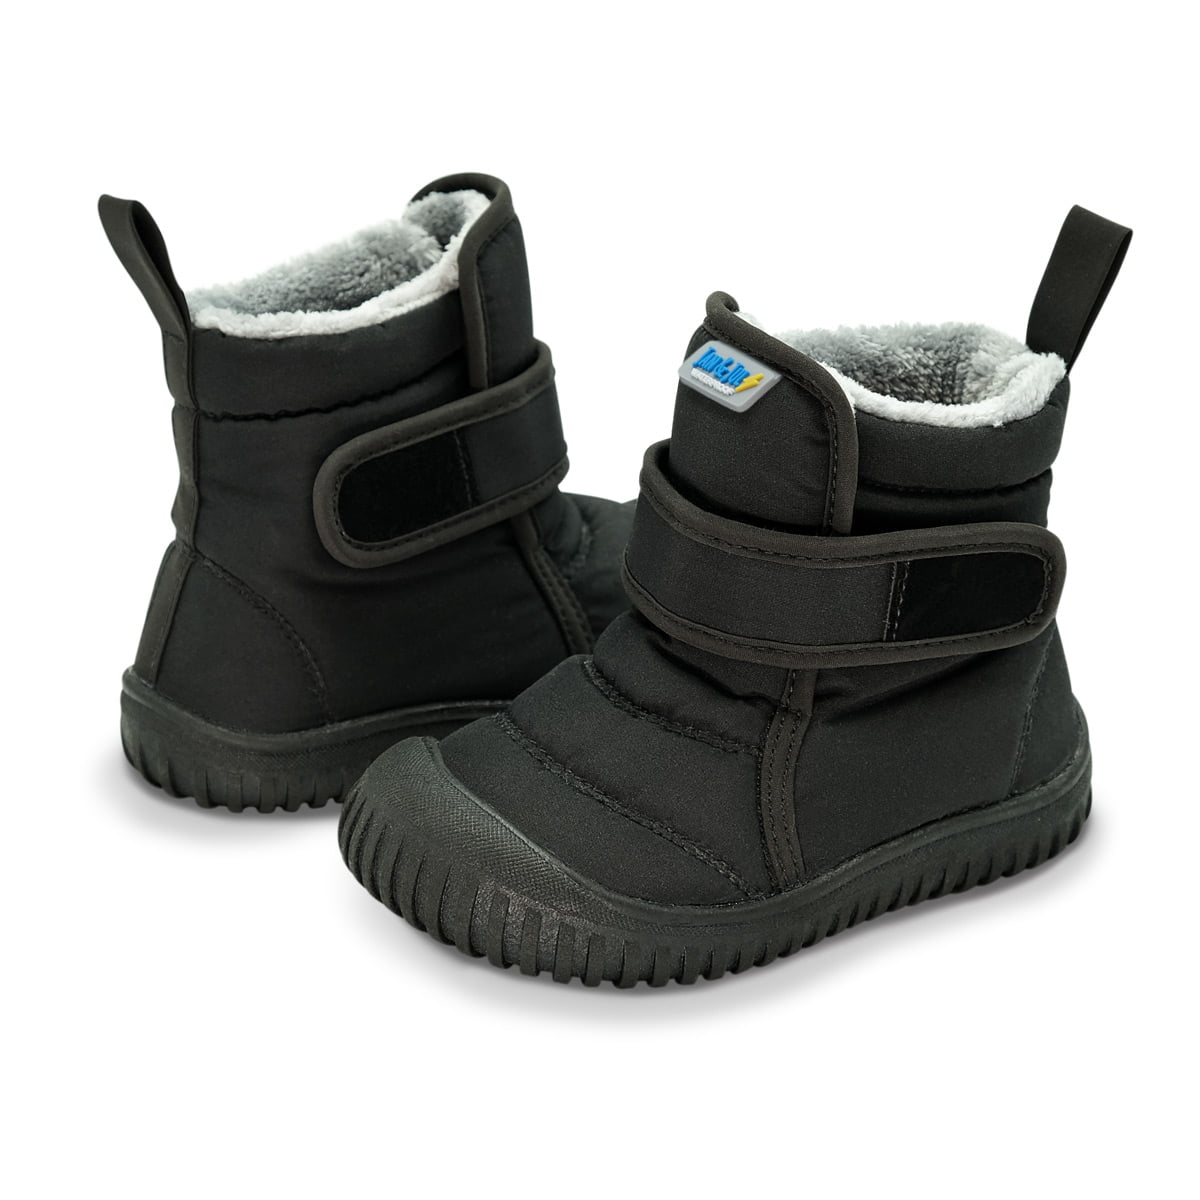 JAN & JUL Toasty-Dry Water-Resistant Winter Boots for Toddlers 